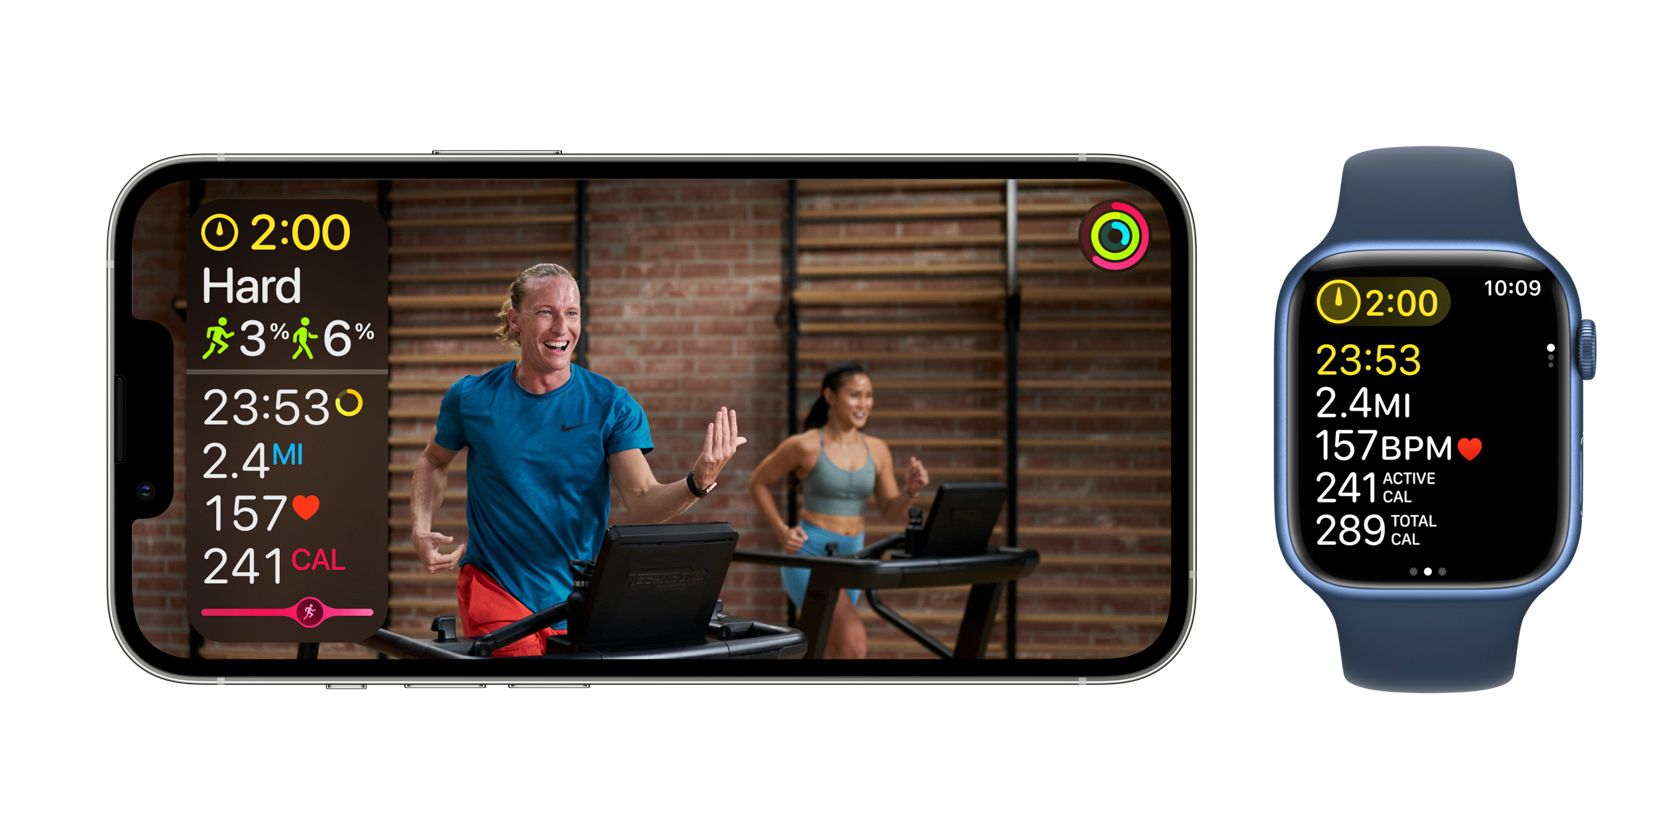 Apple Fitness Plus workout shown on iPhone screen and Apple Watch face